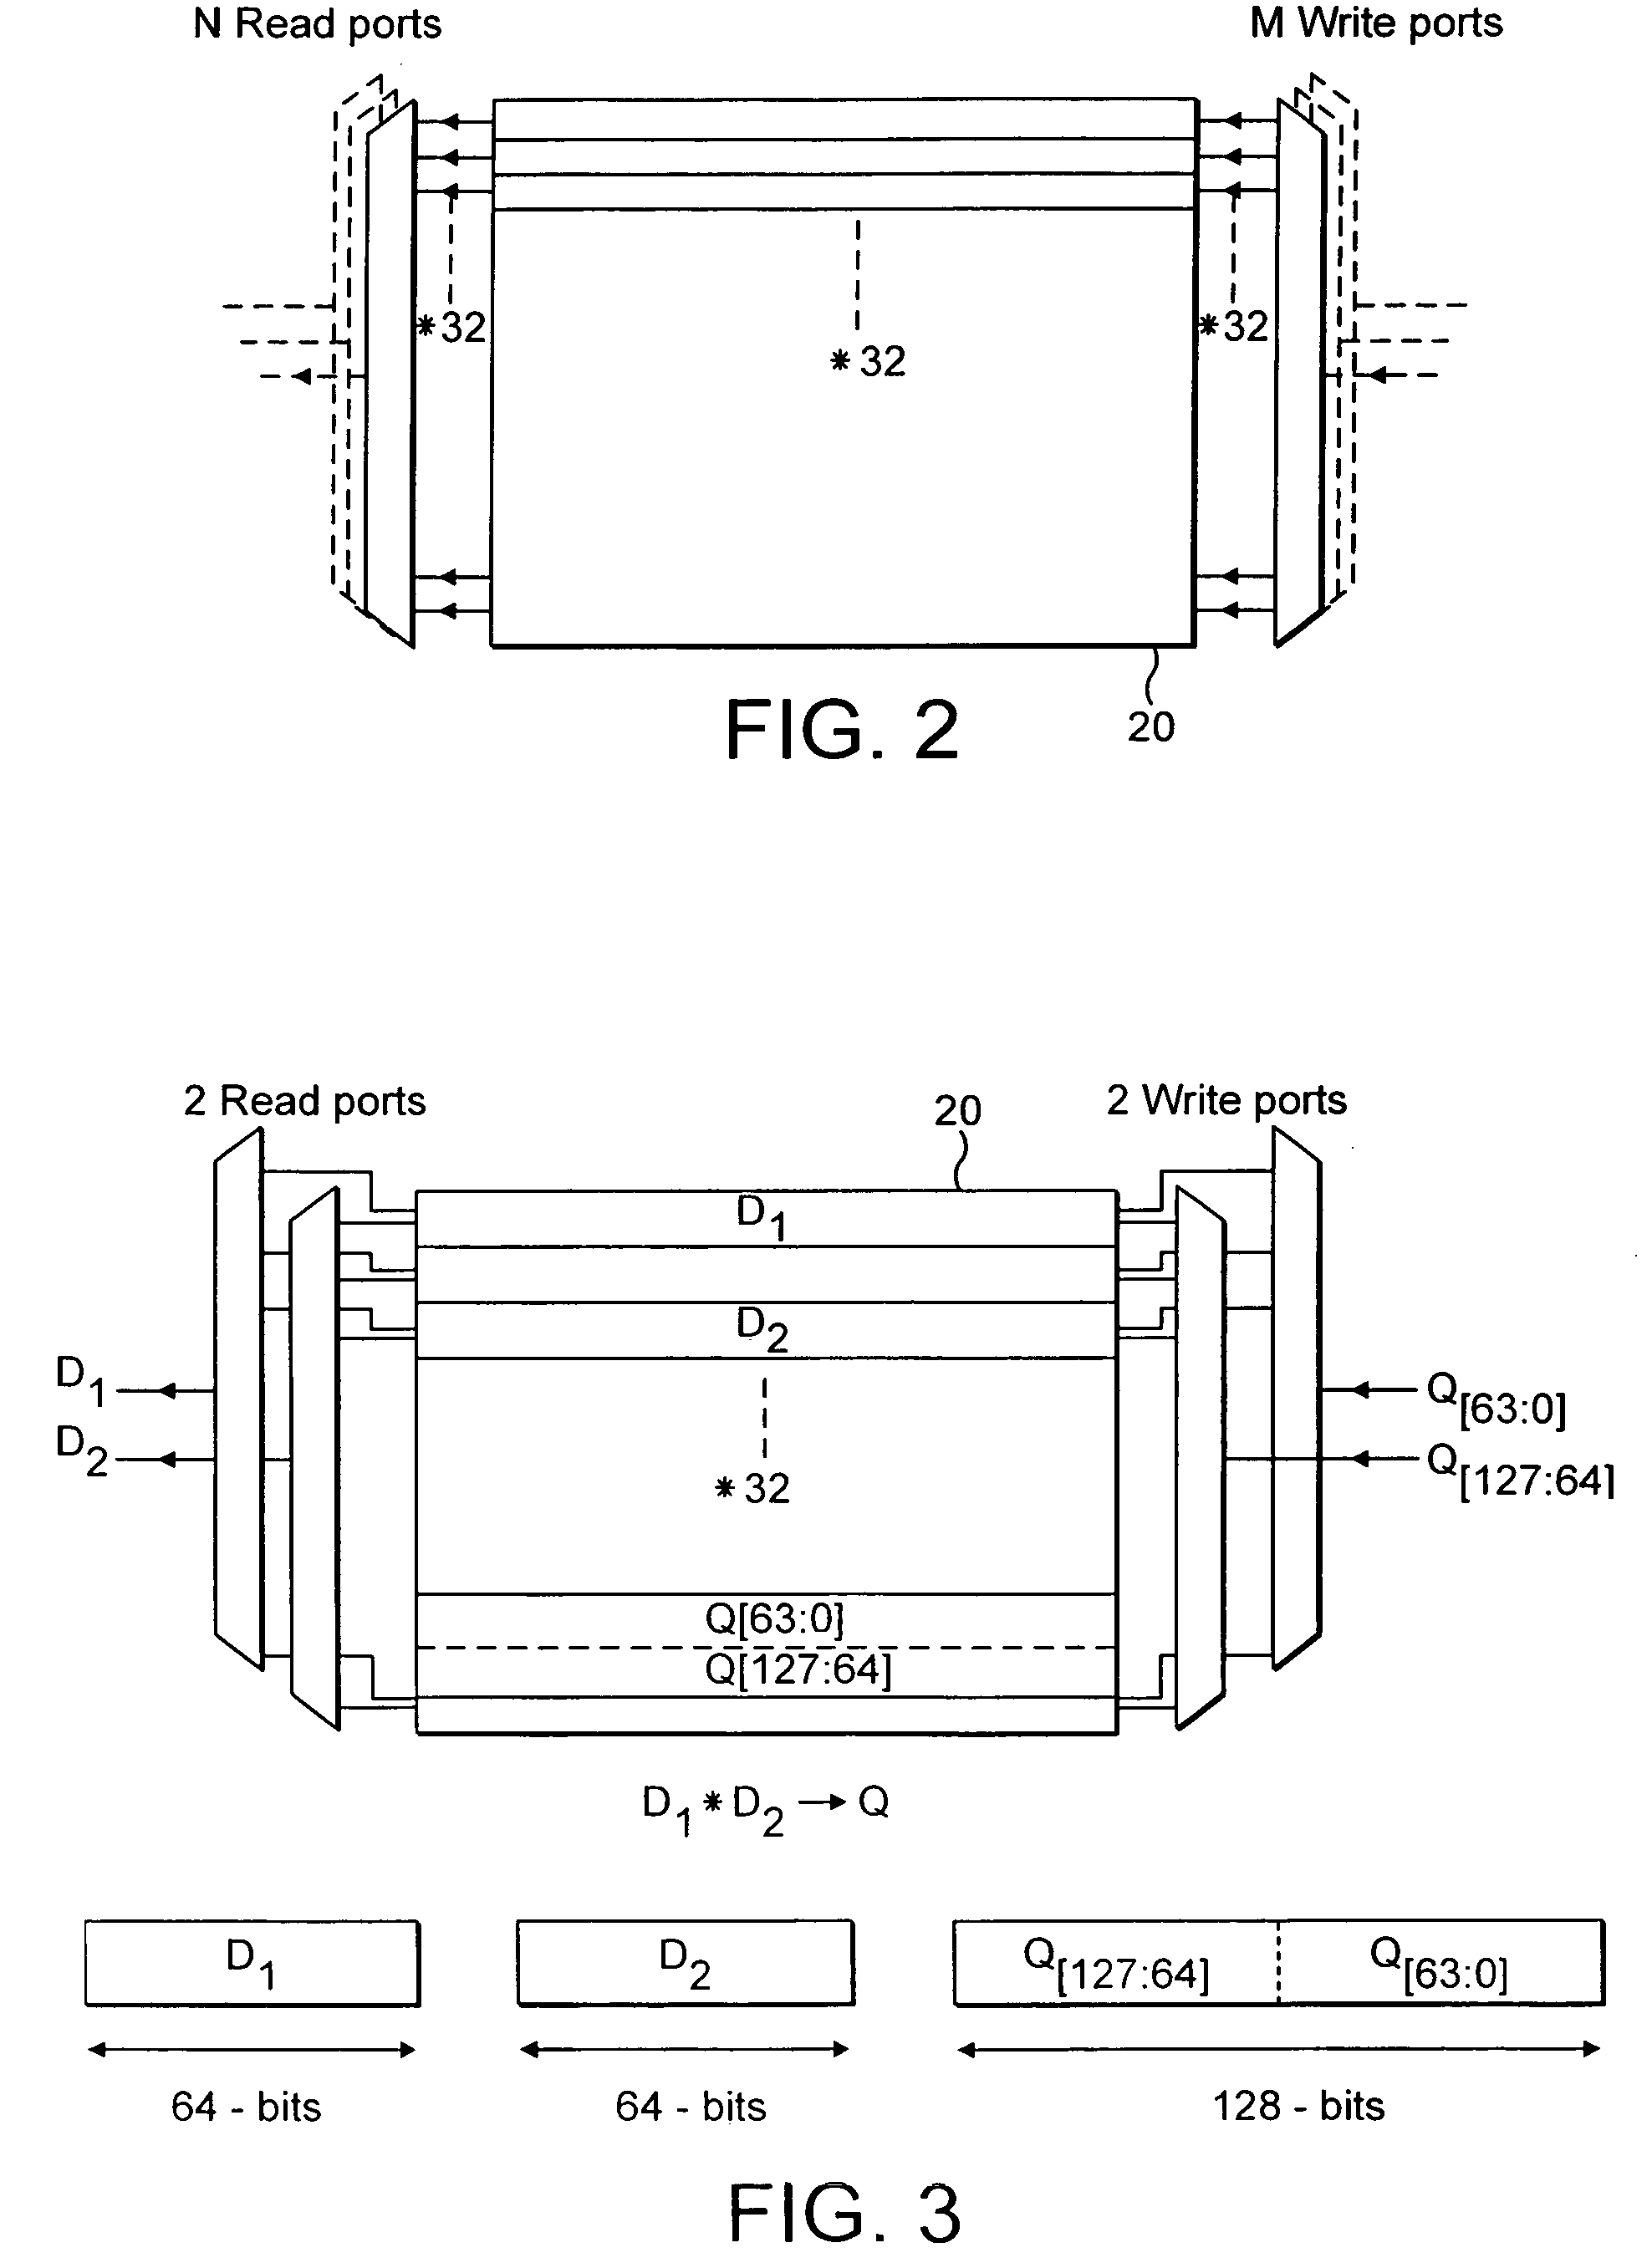 Method and apparatus for constant generation in SIMD processing